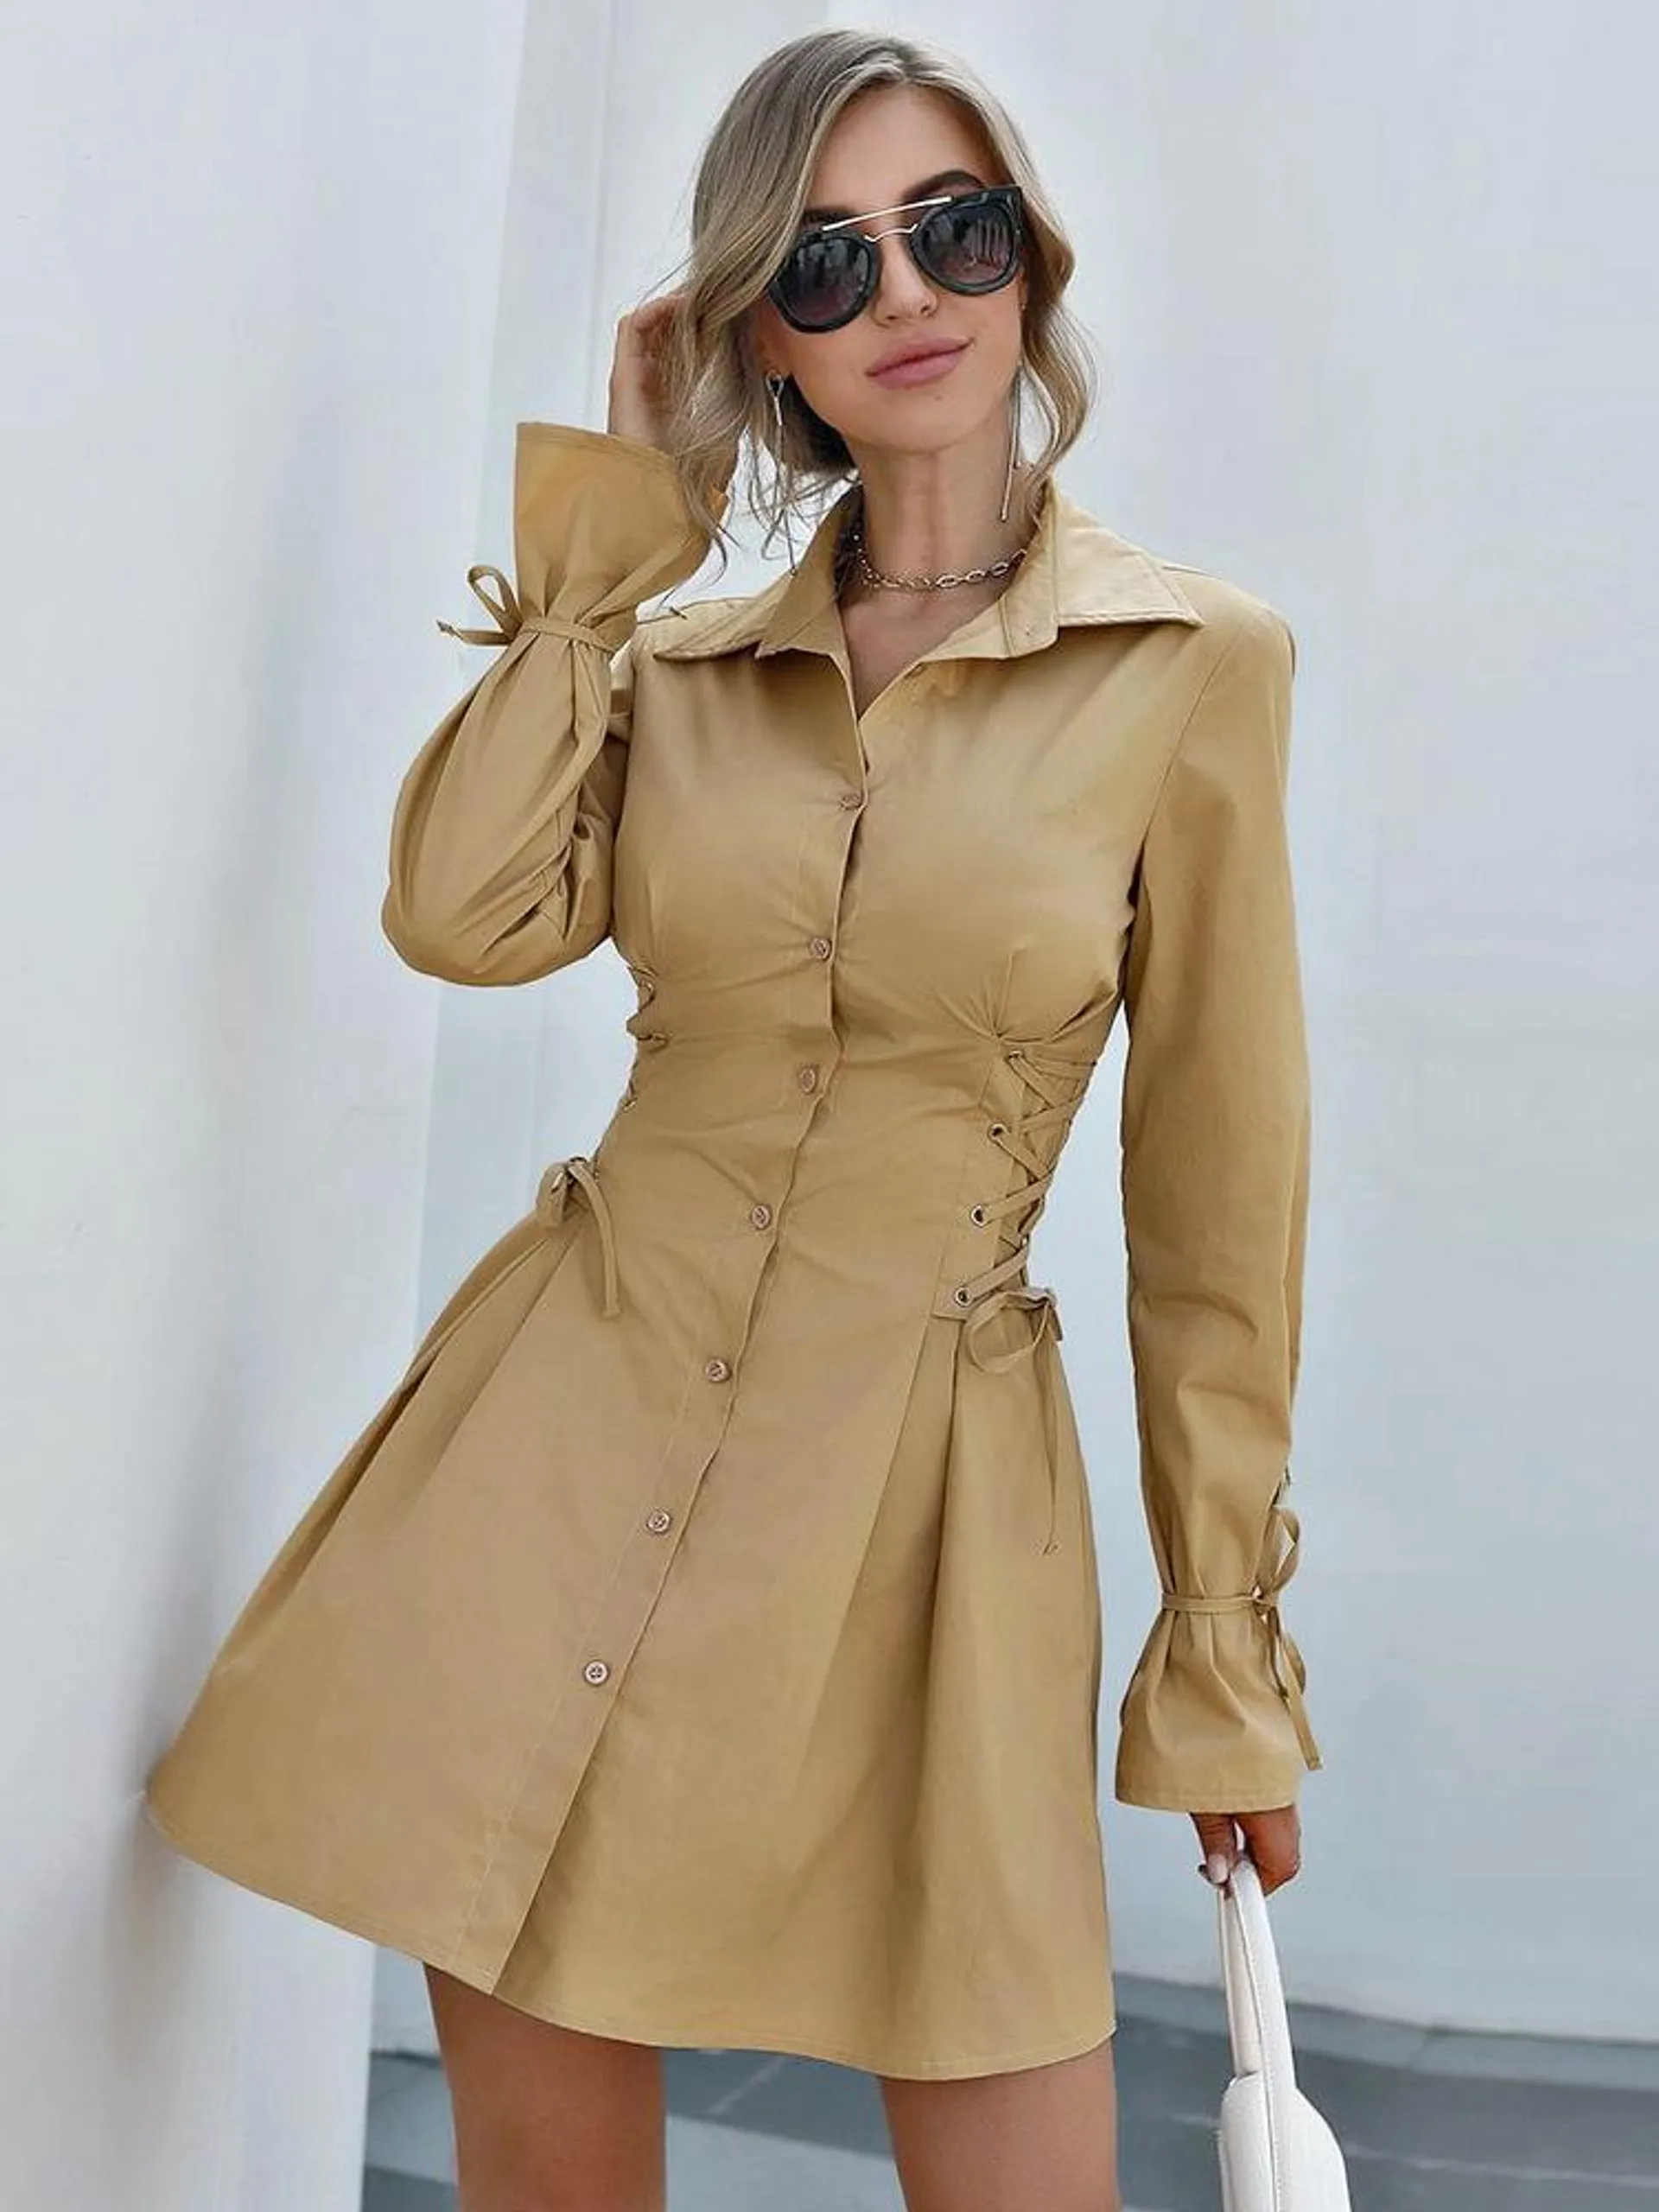 Shirt Dresses Champagne V-Neck Lace Up Long Sleeves Polyester Knotted Dresses Midi Dress